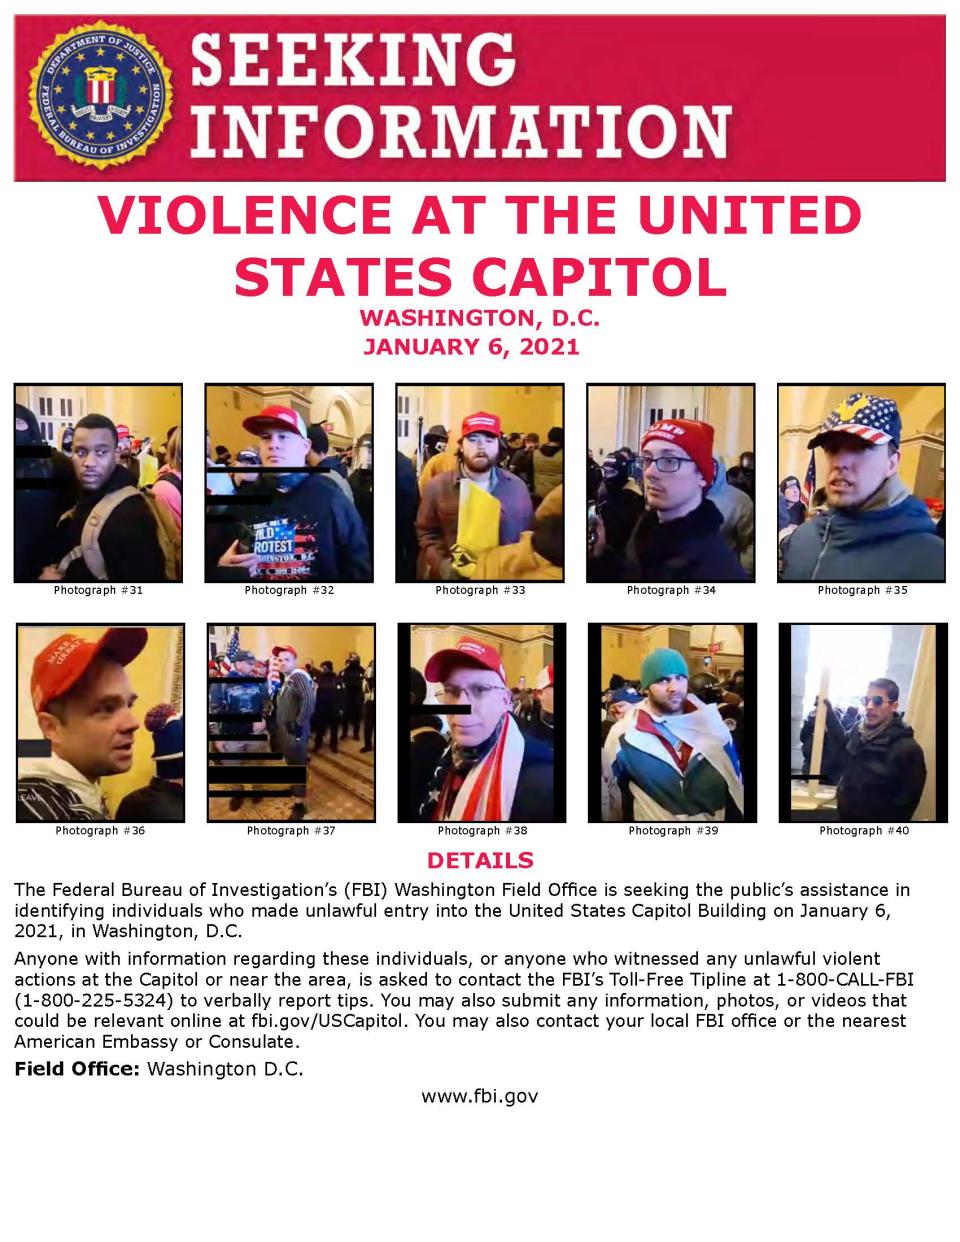 The FBI is "seeking the public's assistance in identifying individuals who made unlawful entry into the United States Capitol Building on January 6, 2021, in Washington, D.C."